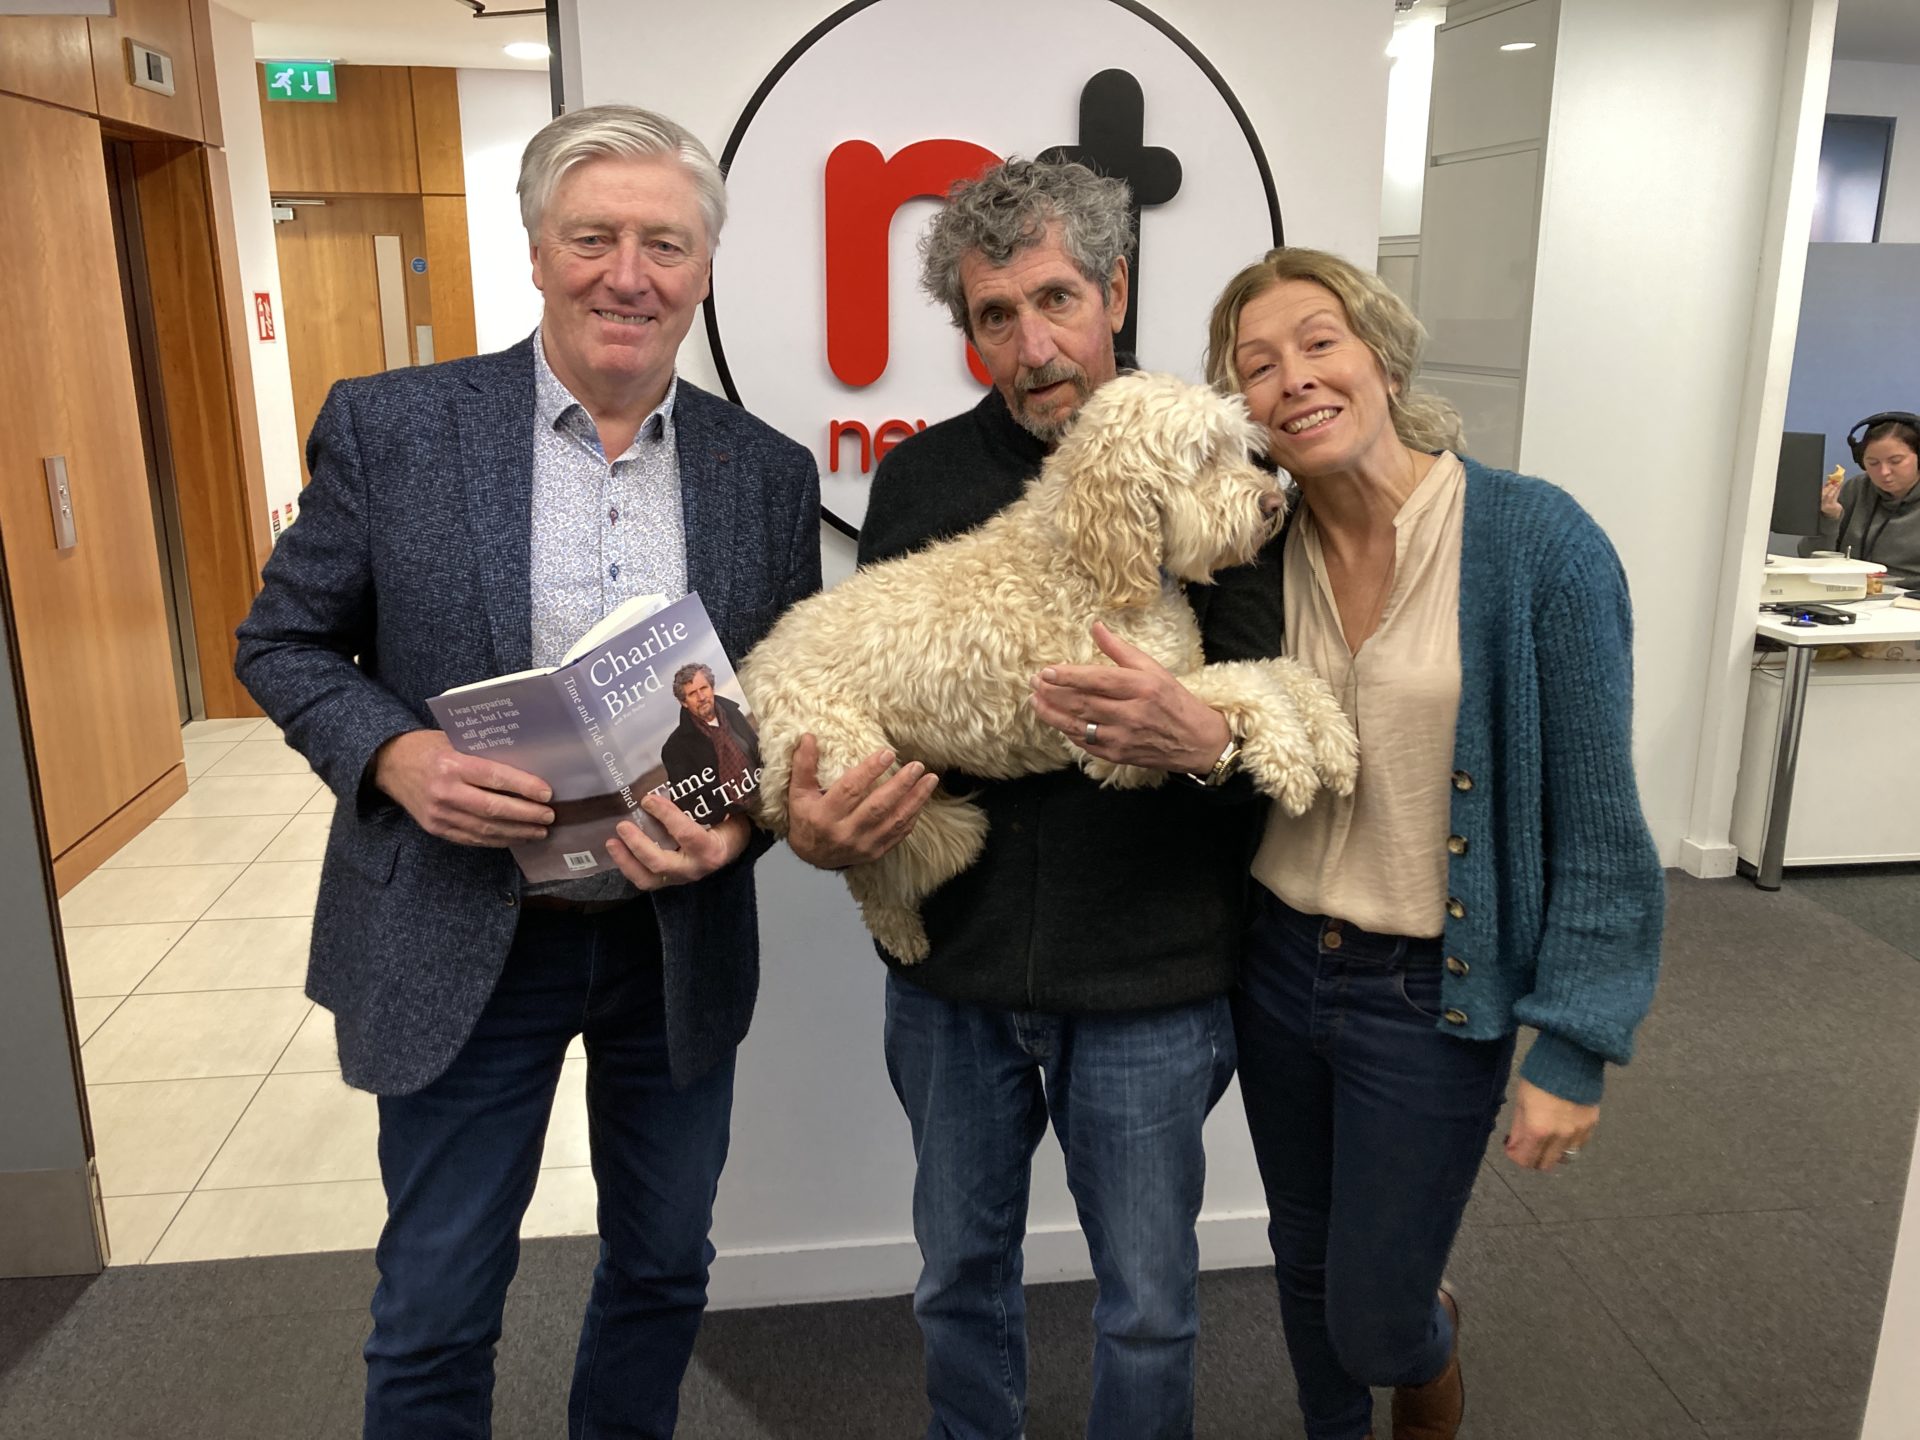 Pat Kenny, Charlie Bird, with Tiger, and his wife Claire in Newstalk studios in Dublin